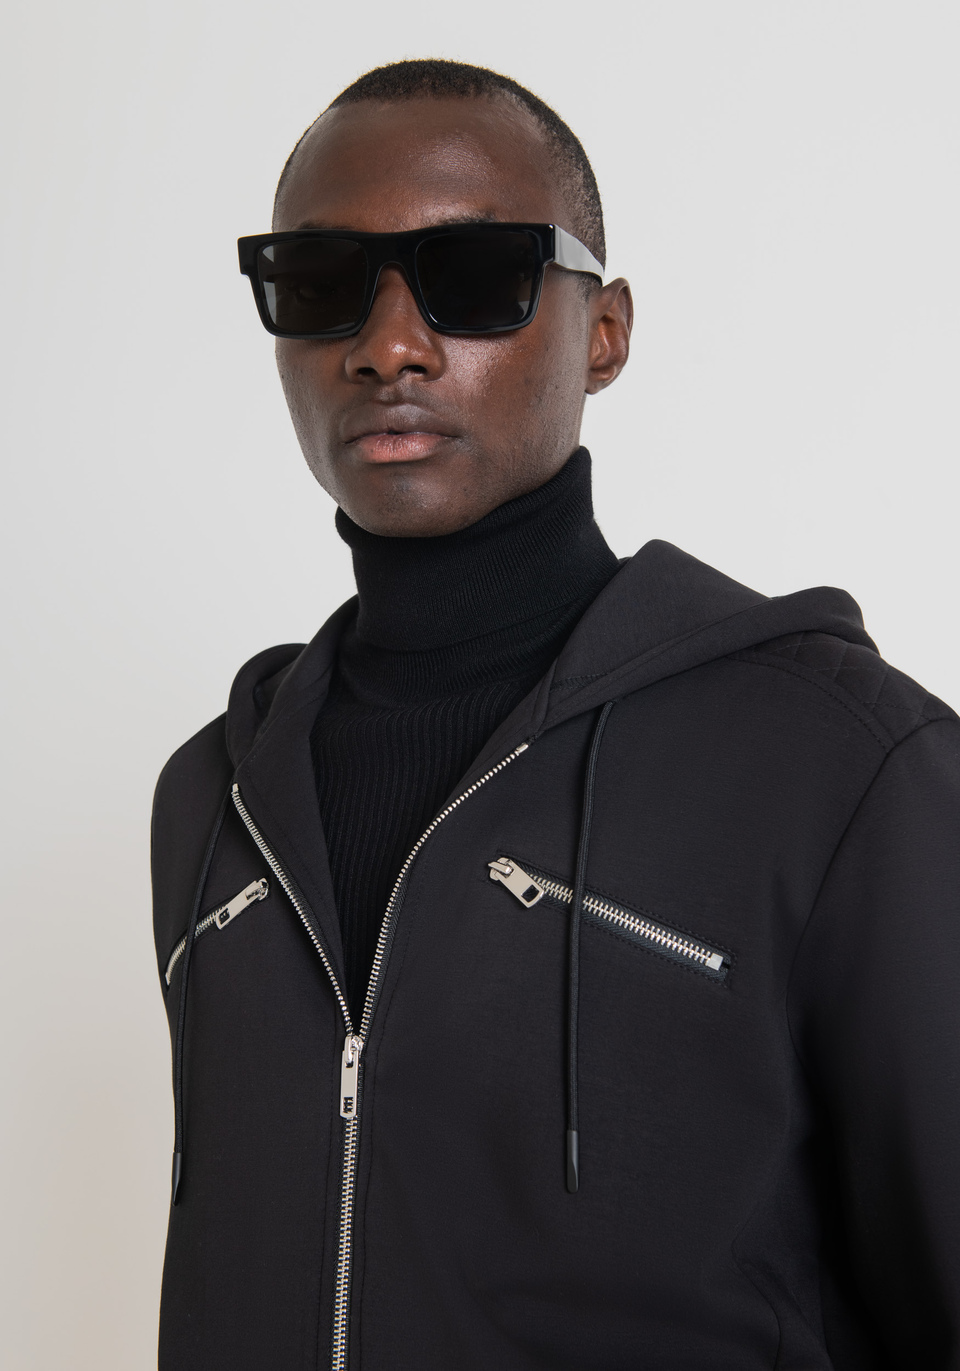 REGULAR FIT HOODIE WITH ZIP AND QUILTED DETAILS - Antony Morato Online Shop